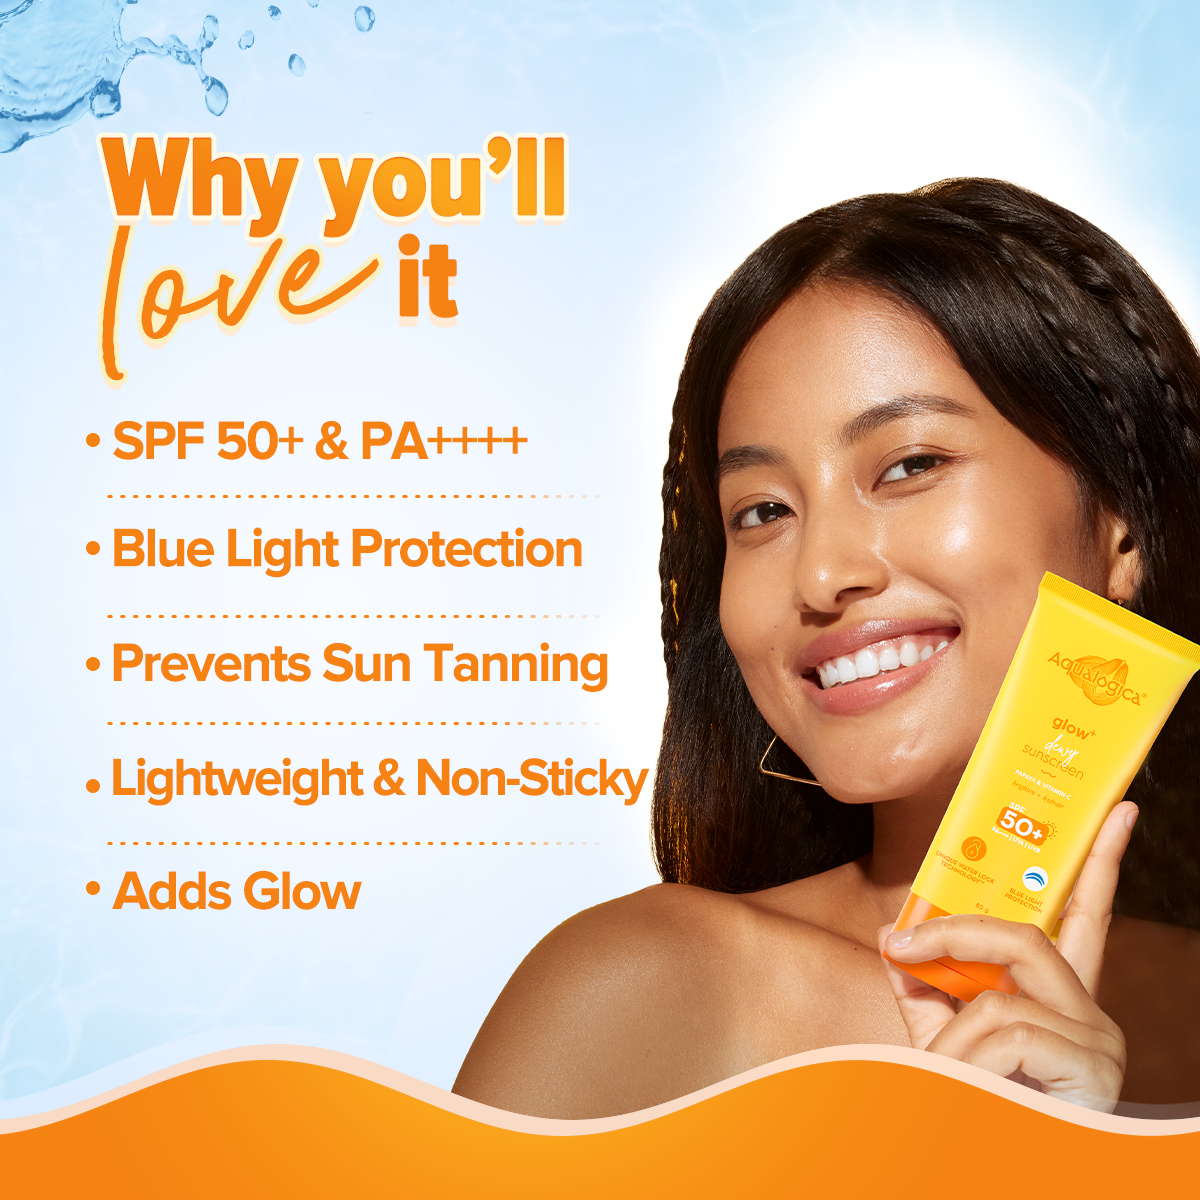 Glow+ Dewy Sunscreen with SPF 50+ & PA++++ for UVA/B & Blue Light Protection & No White Cast - 80g